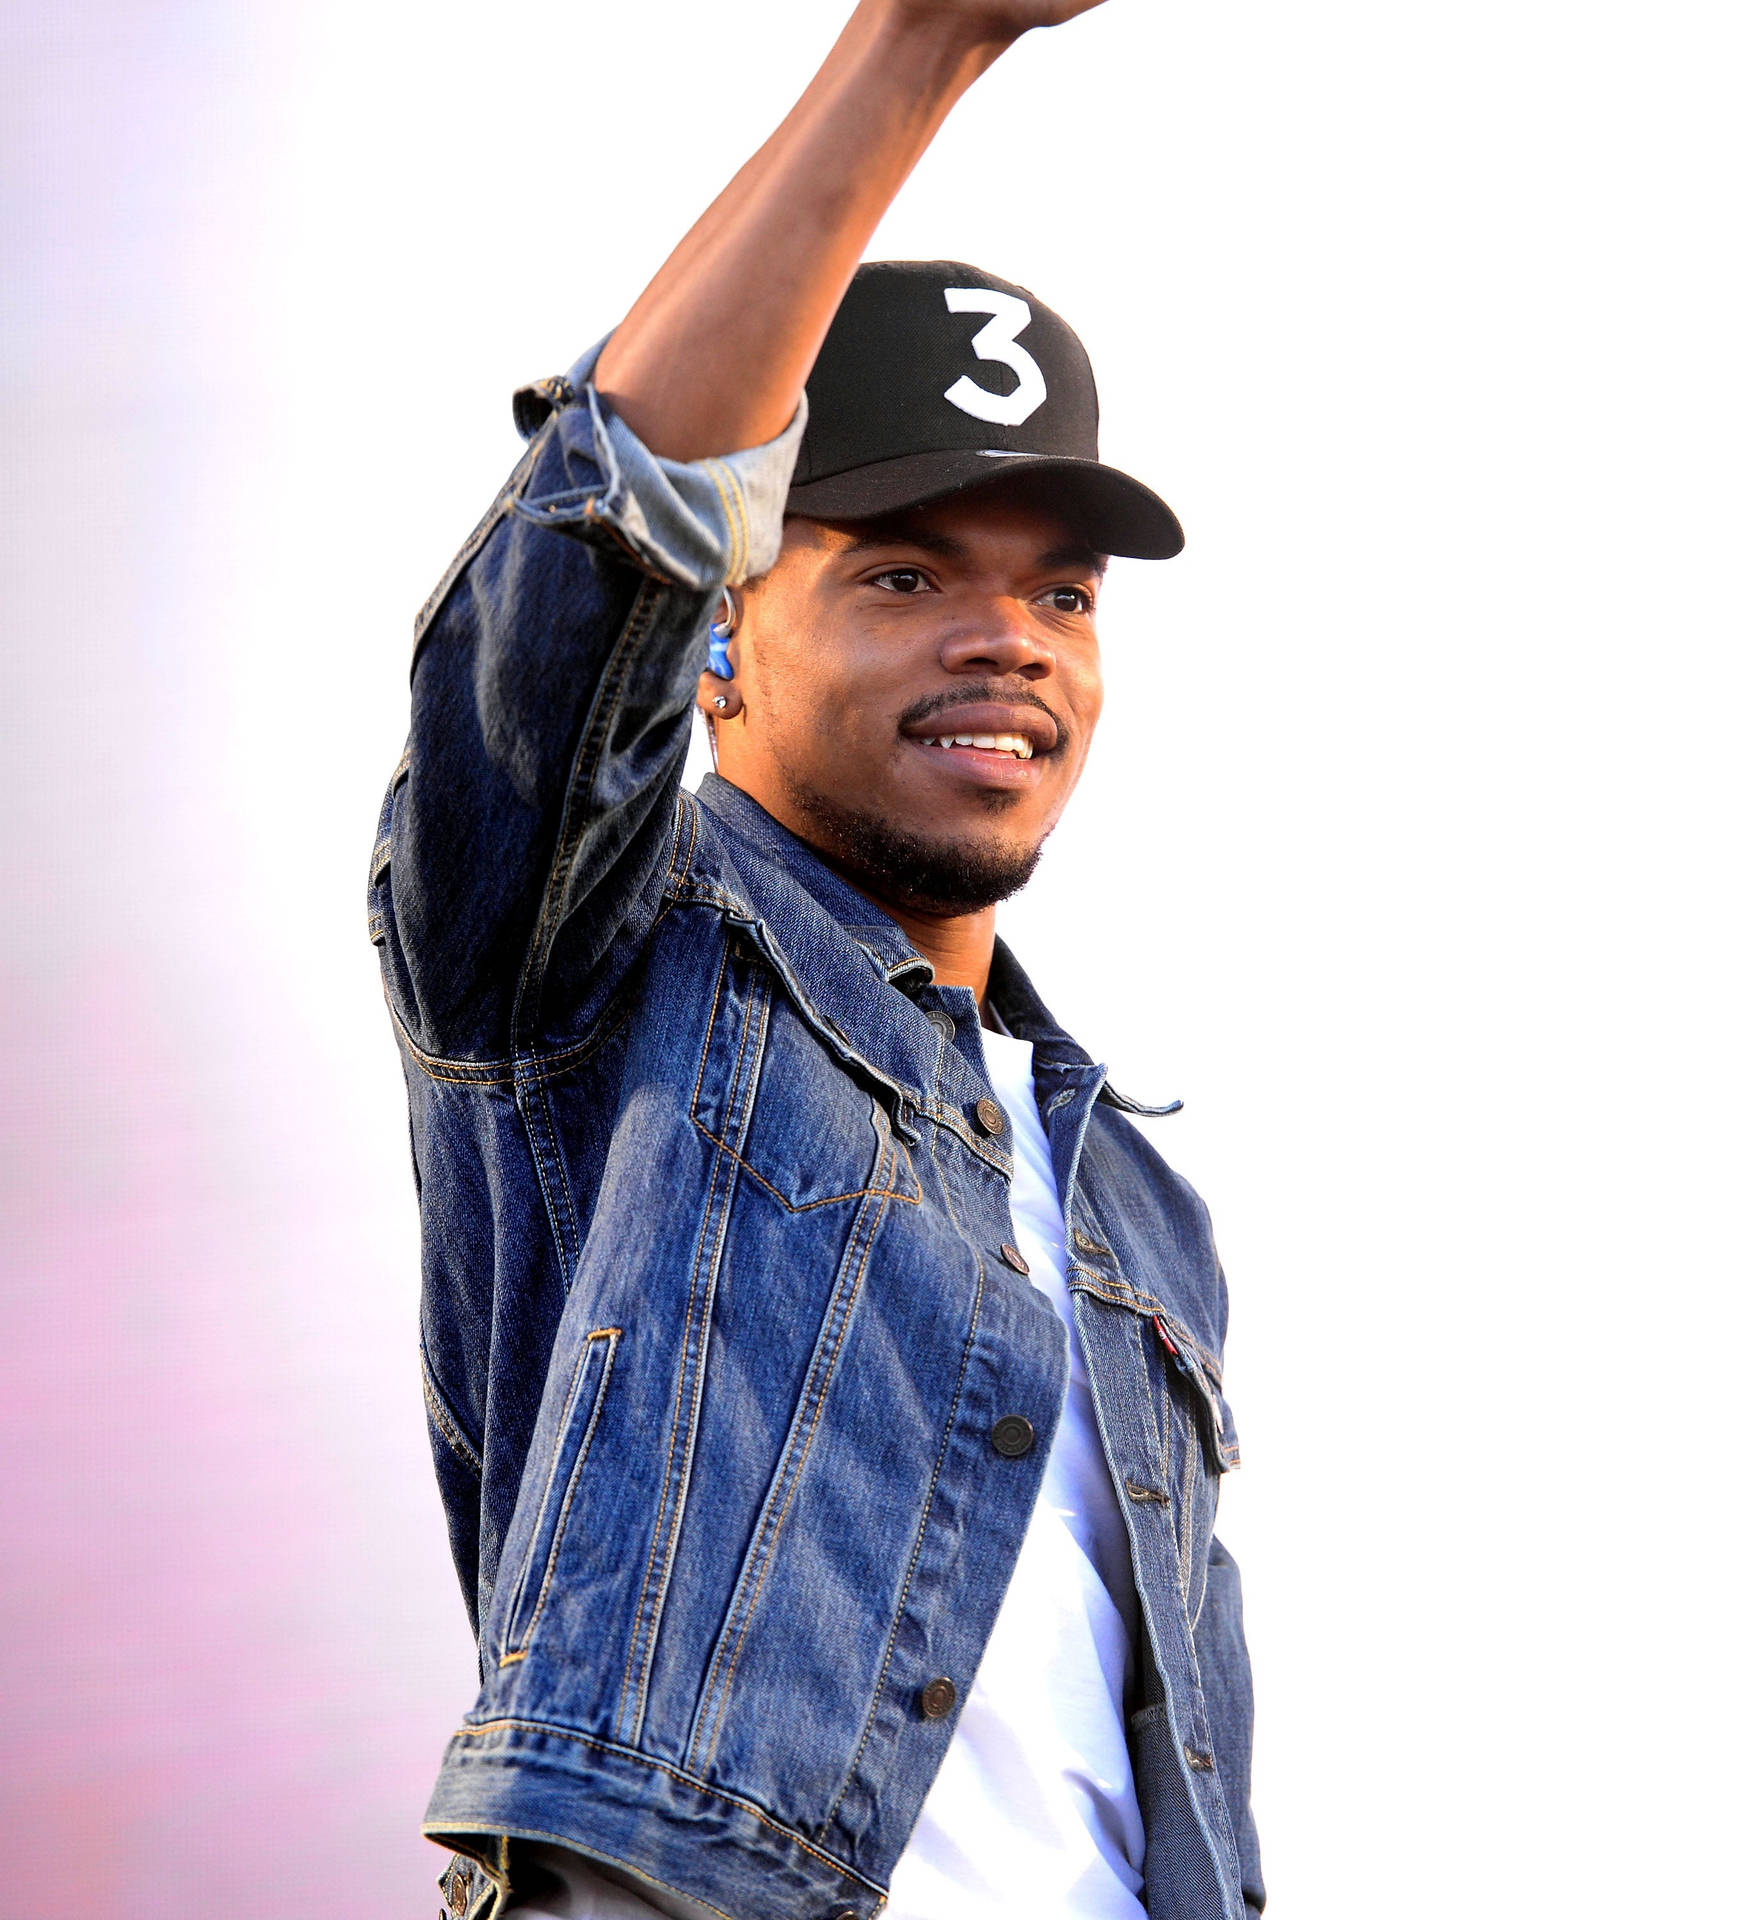 Cheery Chance The Rapper Wallpaper